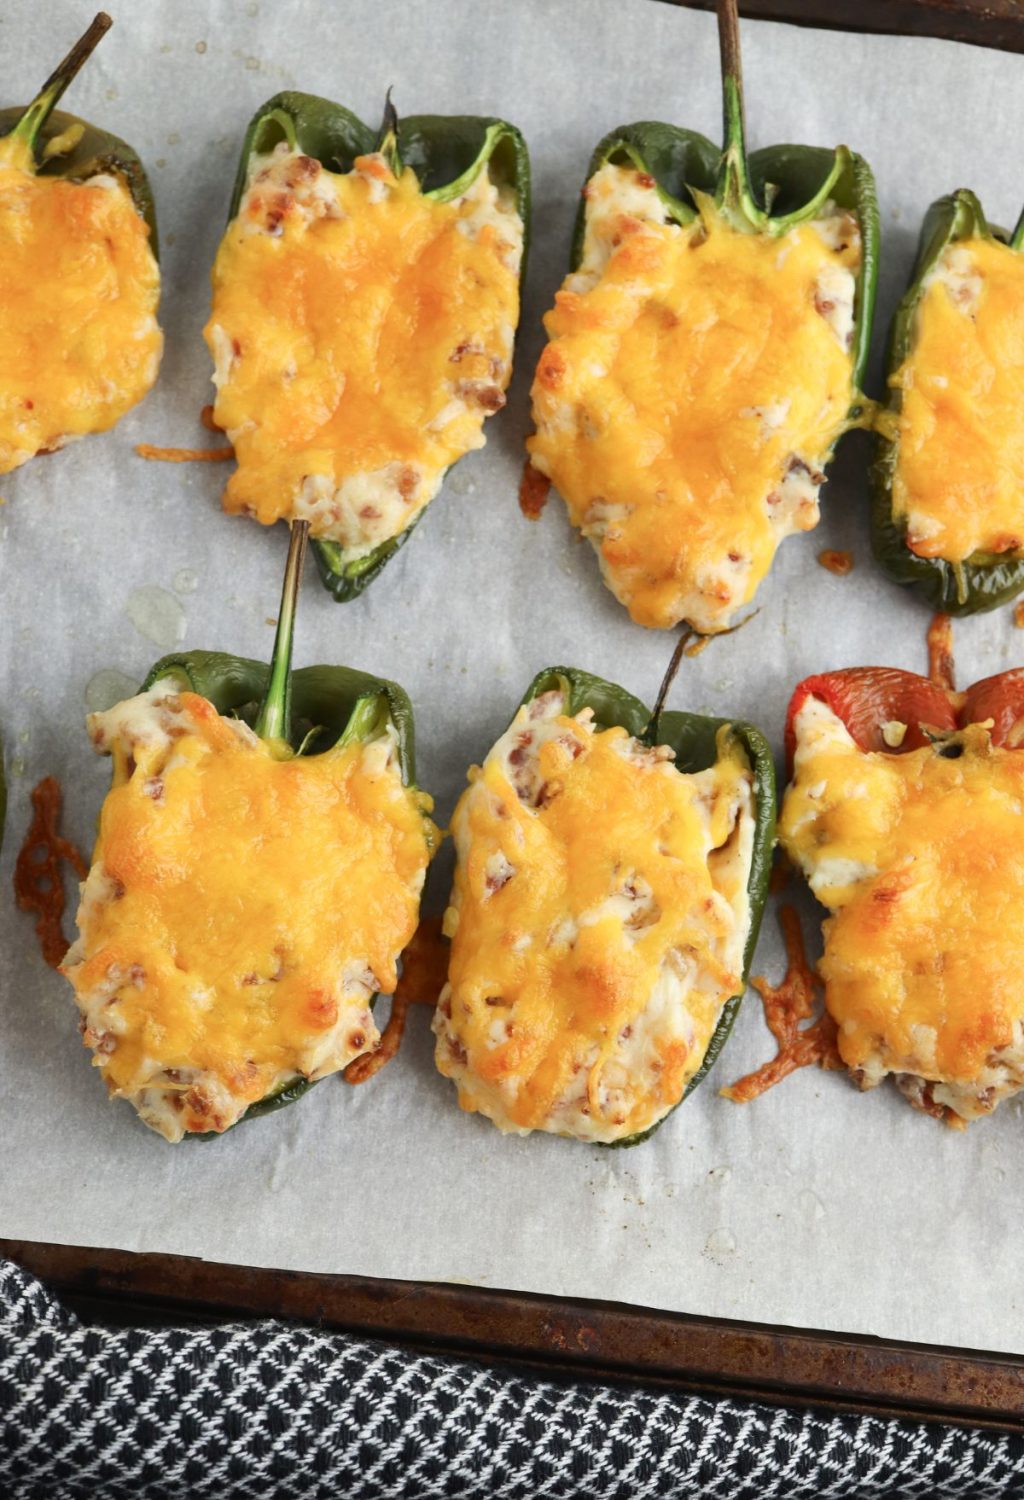 A group of stuffed peppers with cheese.